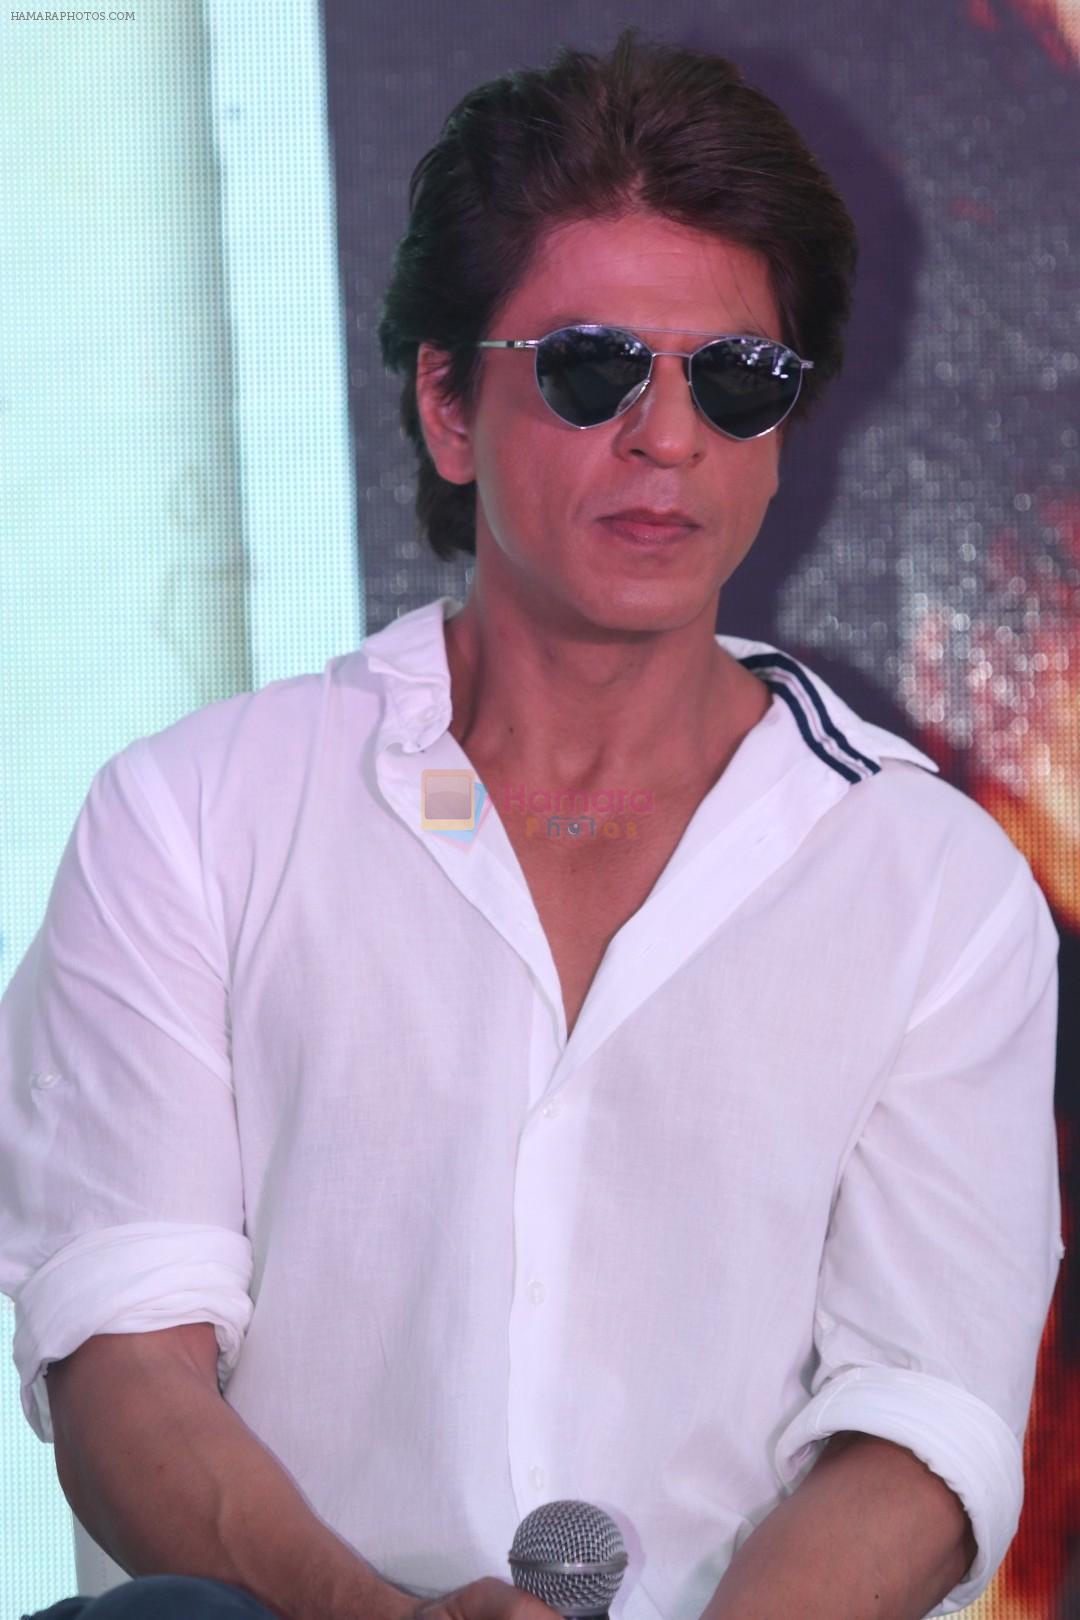 Shah Rukh Khan at the Song Launch Of Film Jab Harry Met Sejal on 26th July 2017